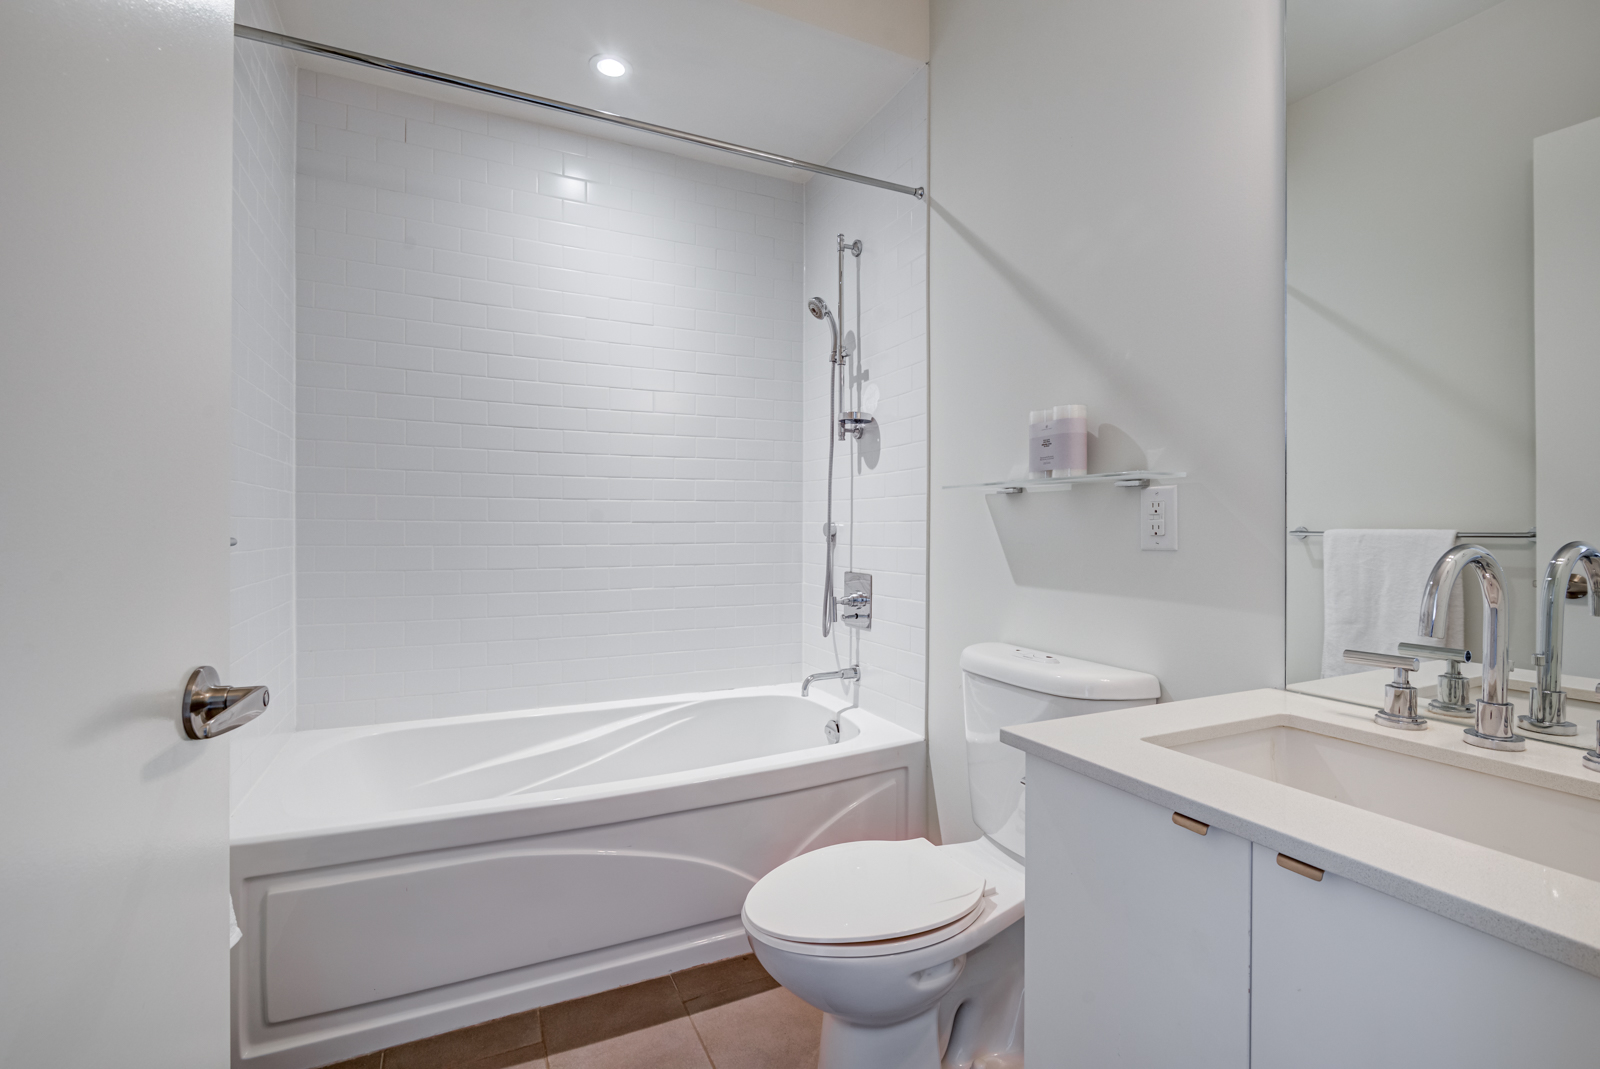 Bathroom with white tiles, tub, shelves and vanity